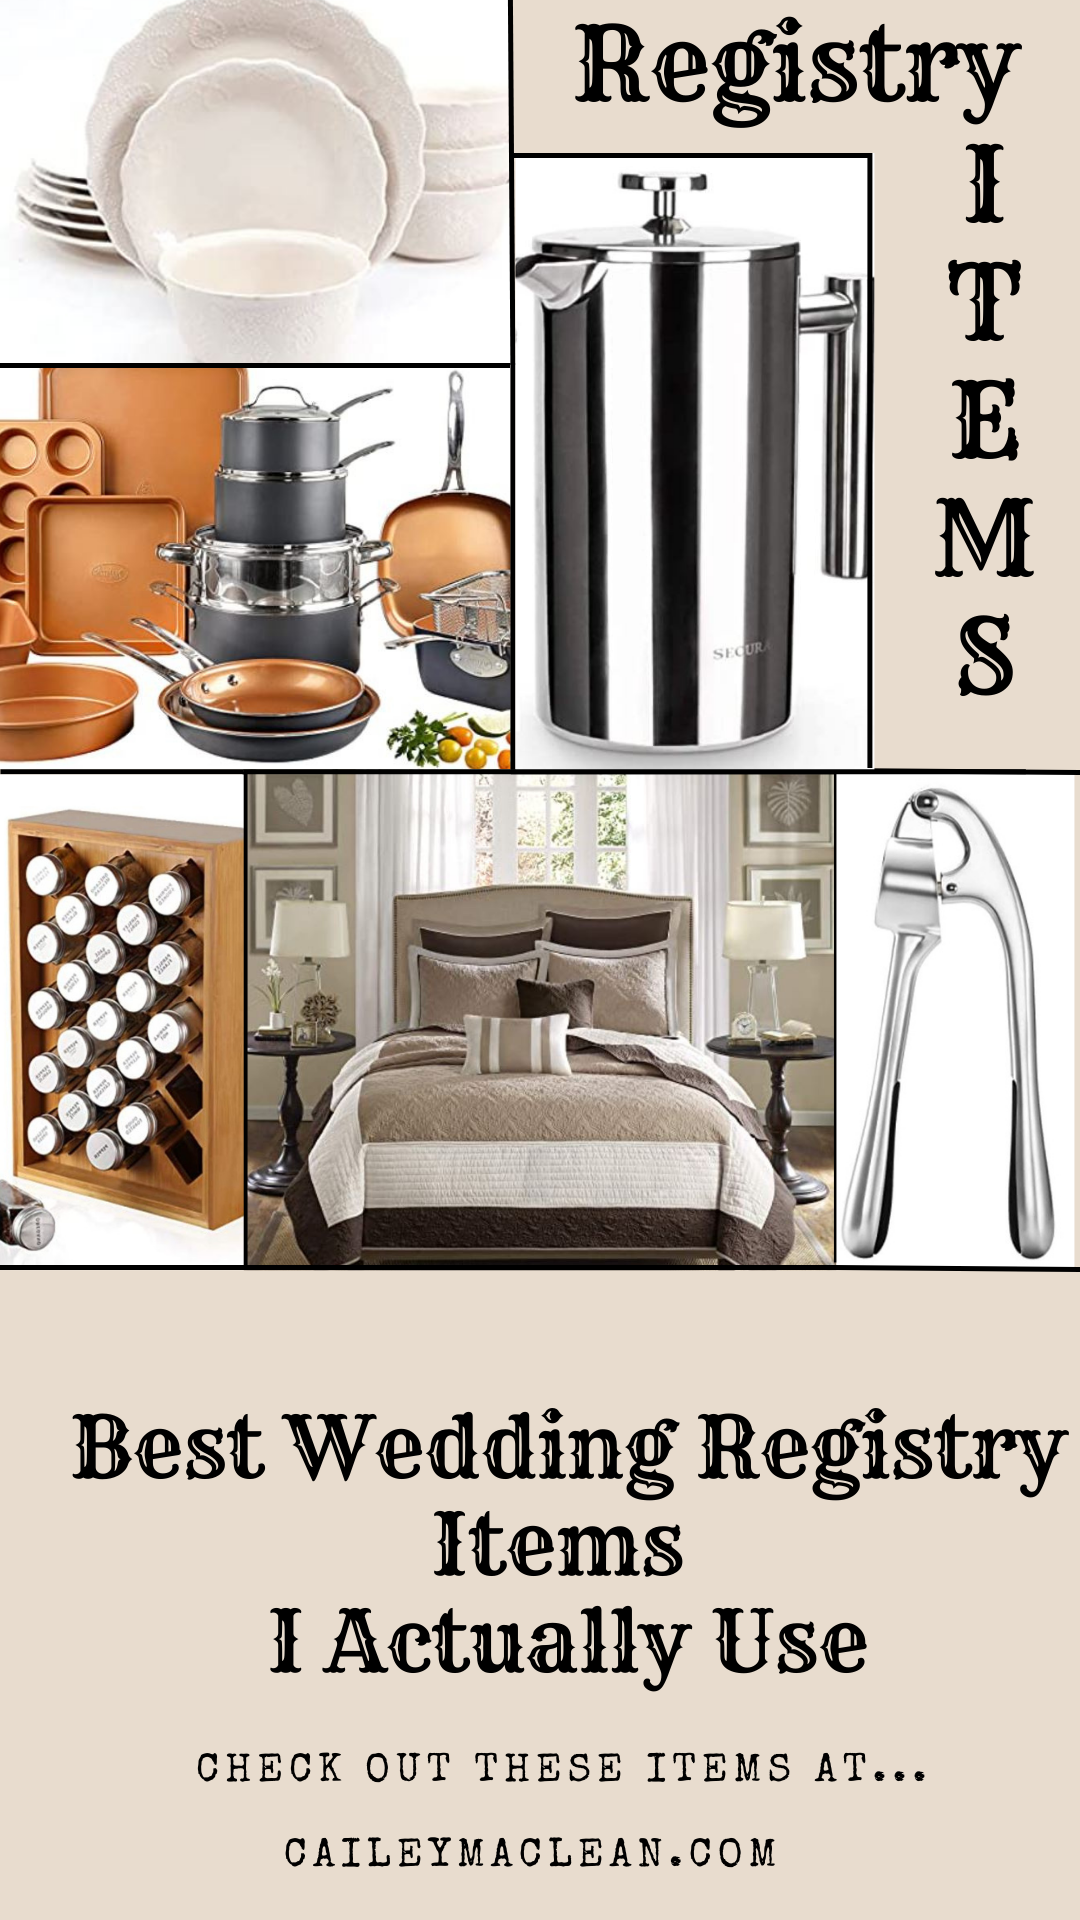 The Ultimate Wedding Registry Guide